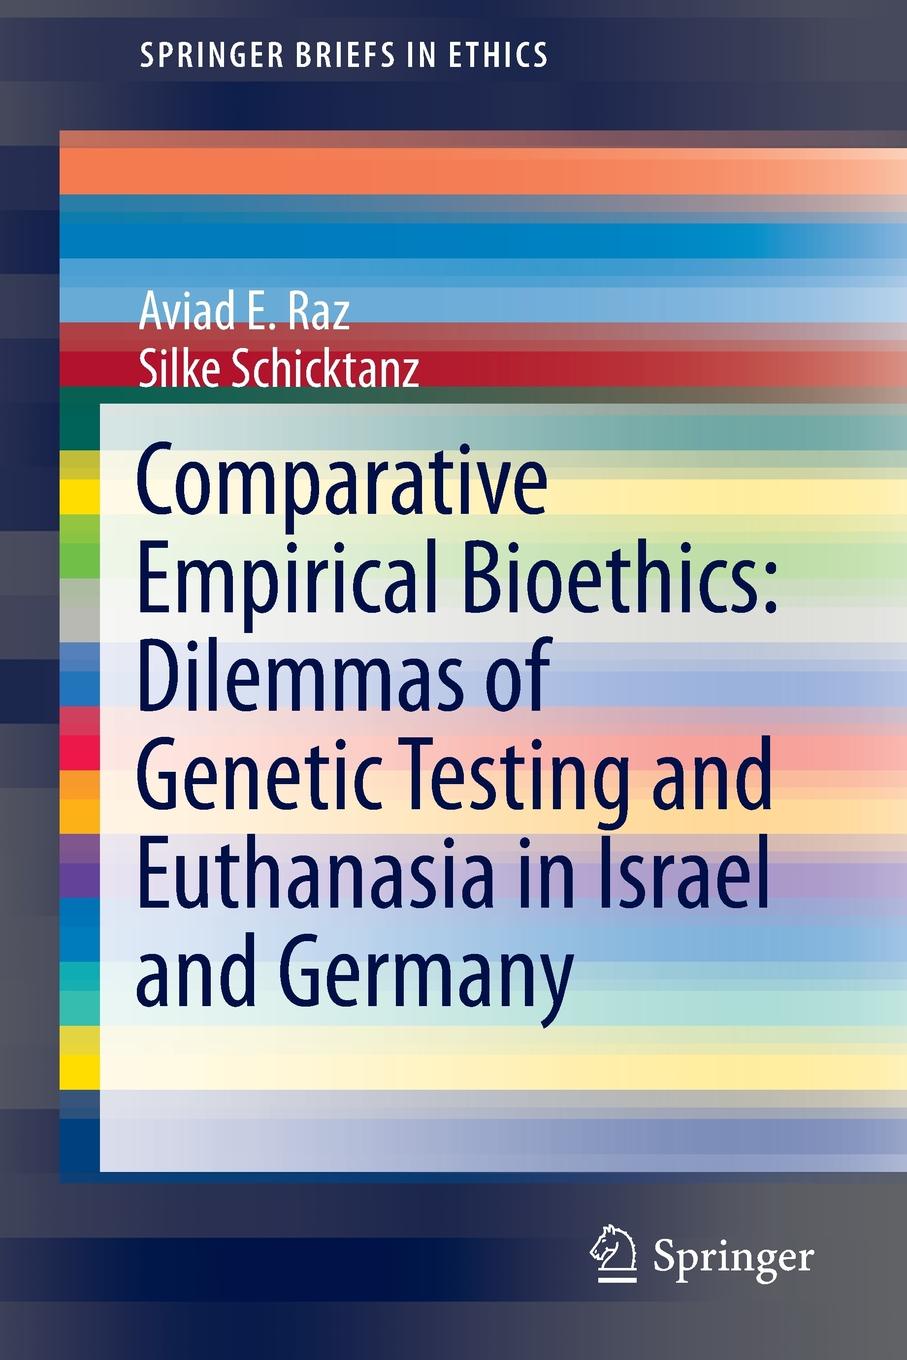 Comparative Empirical Bioethics. Dilemmas of Genetic Testing and Euthanasia in Israel and Germany